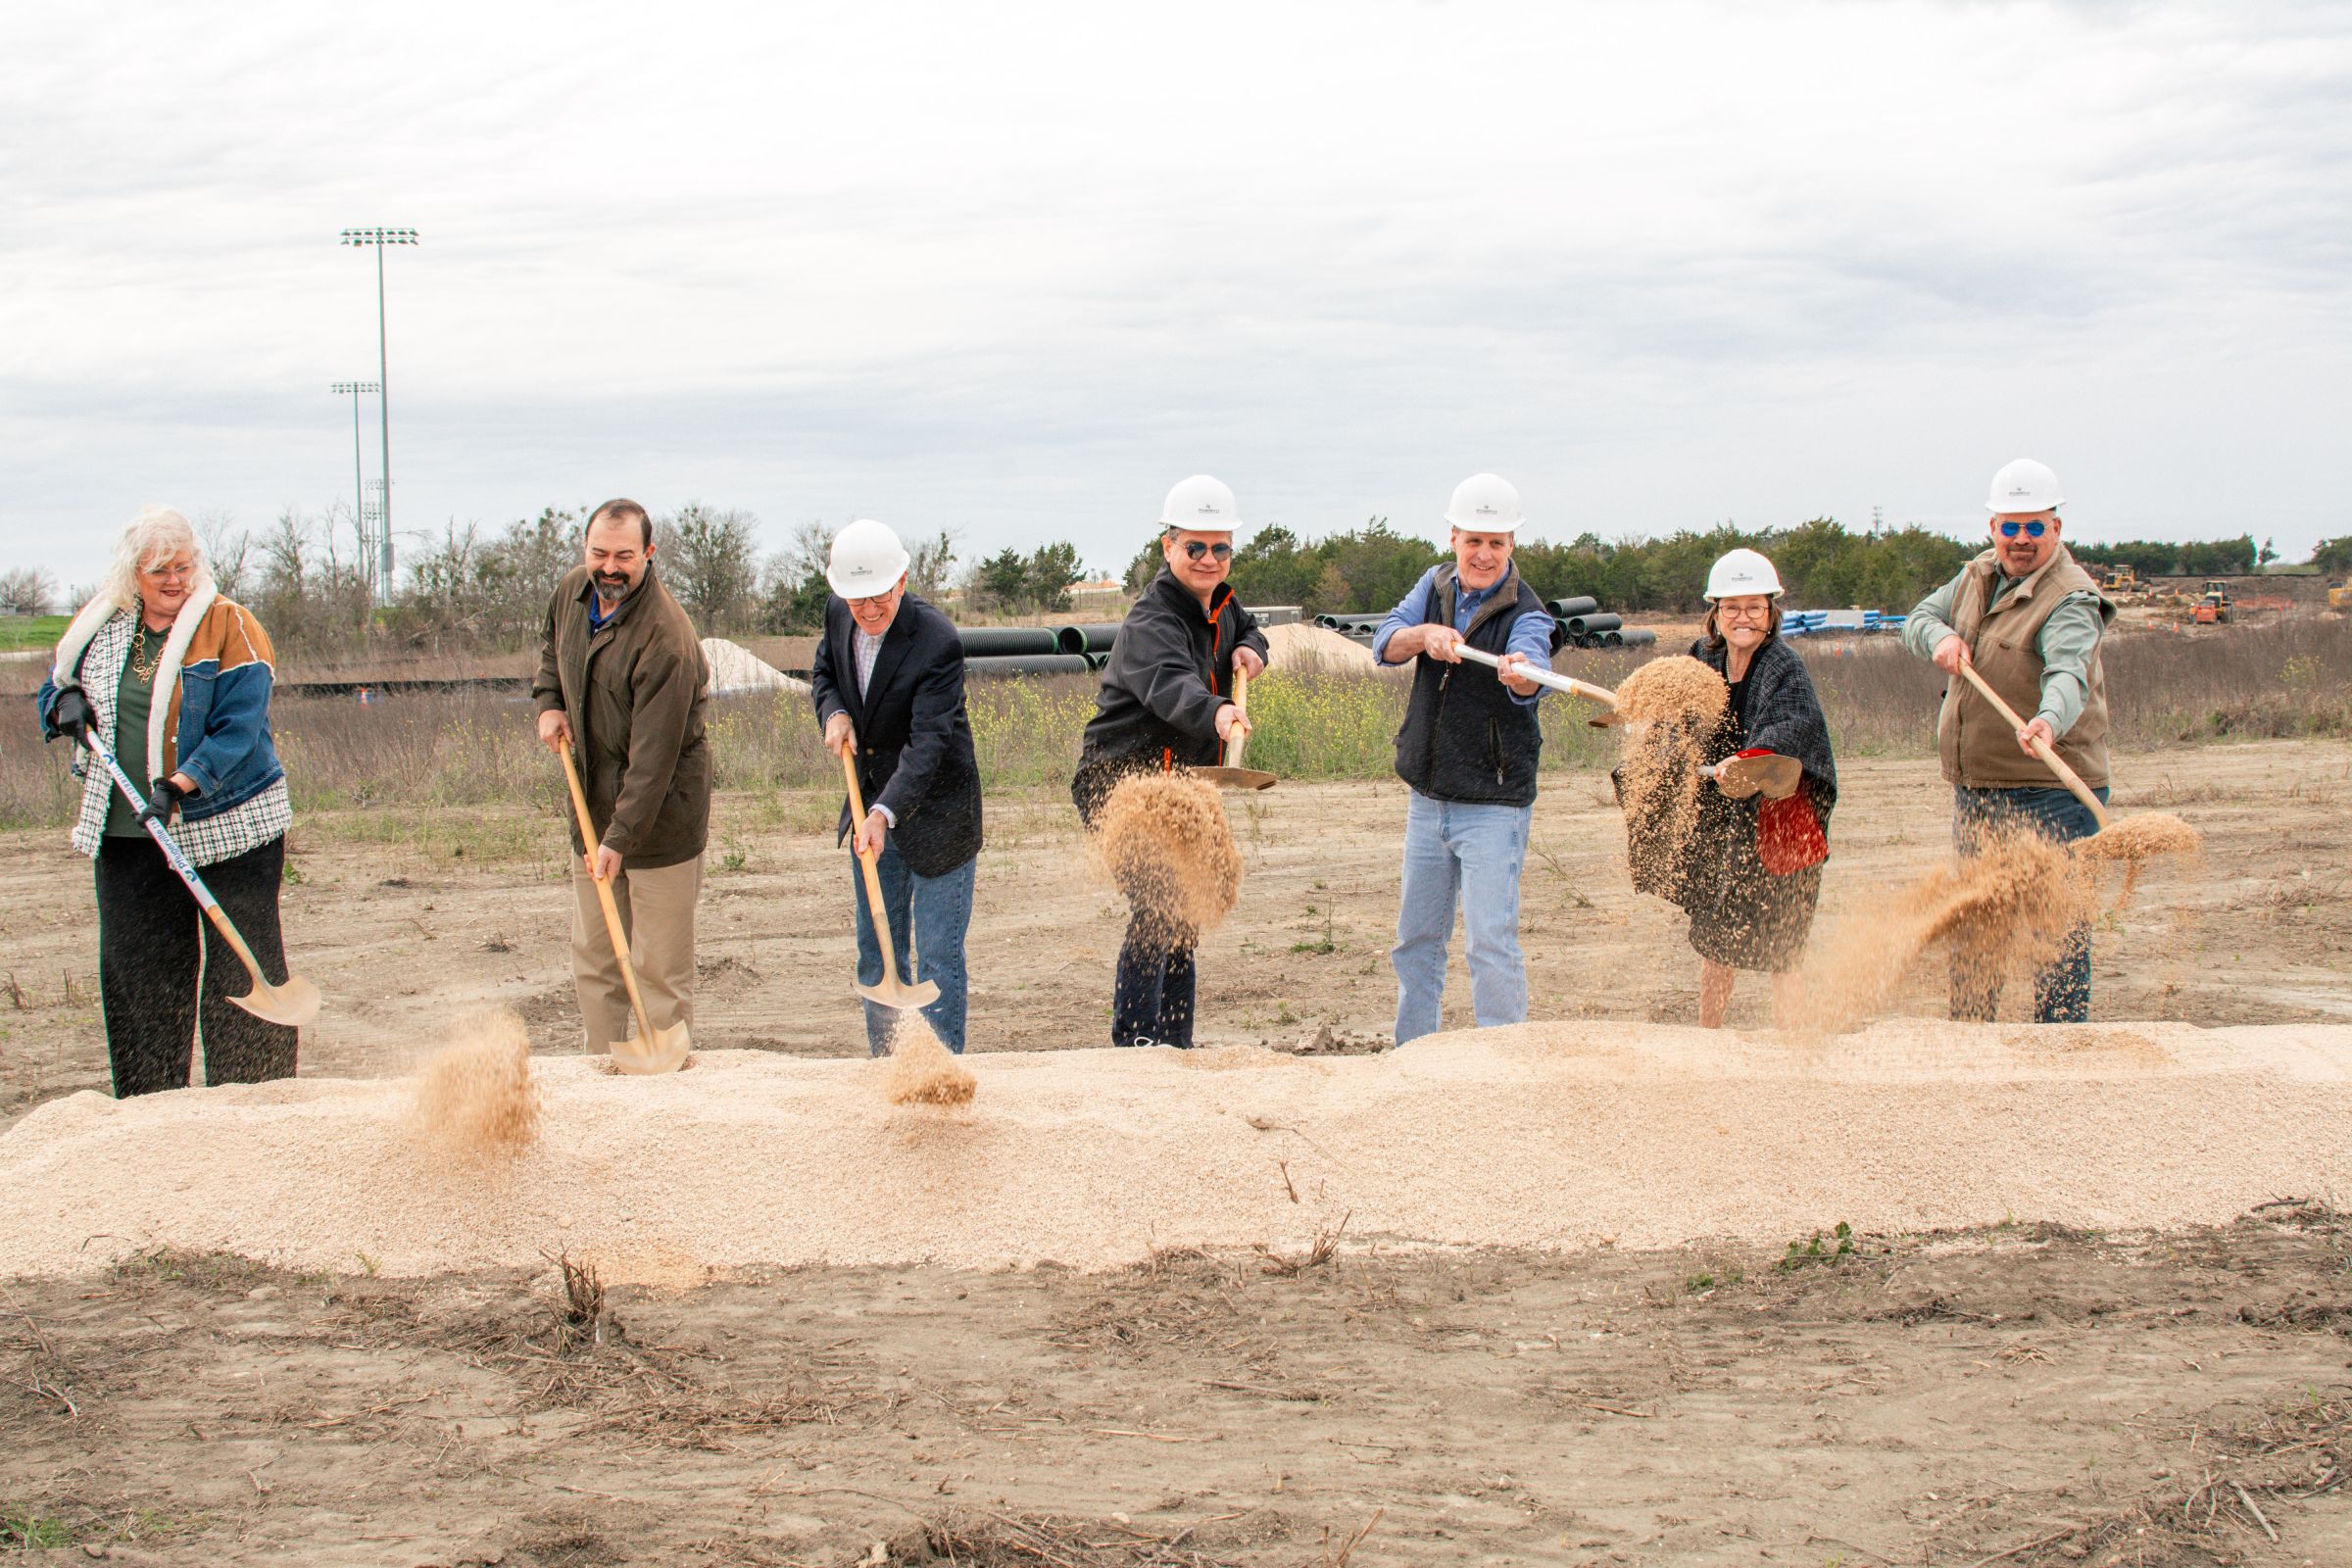 PRECISION METAL FABRICATION LEADER BREAKS GROUND ON STATE-OF-THE-ART MANUFACTURING FACILITY IN PFLUGERVILLE’S ONE THIRTY BUSINESS PARK Main Photo